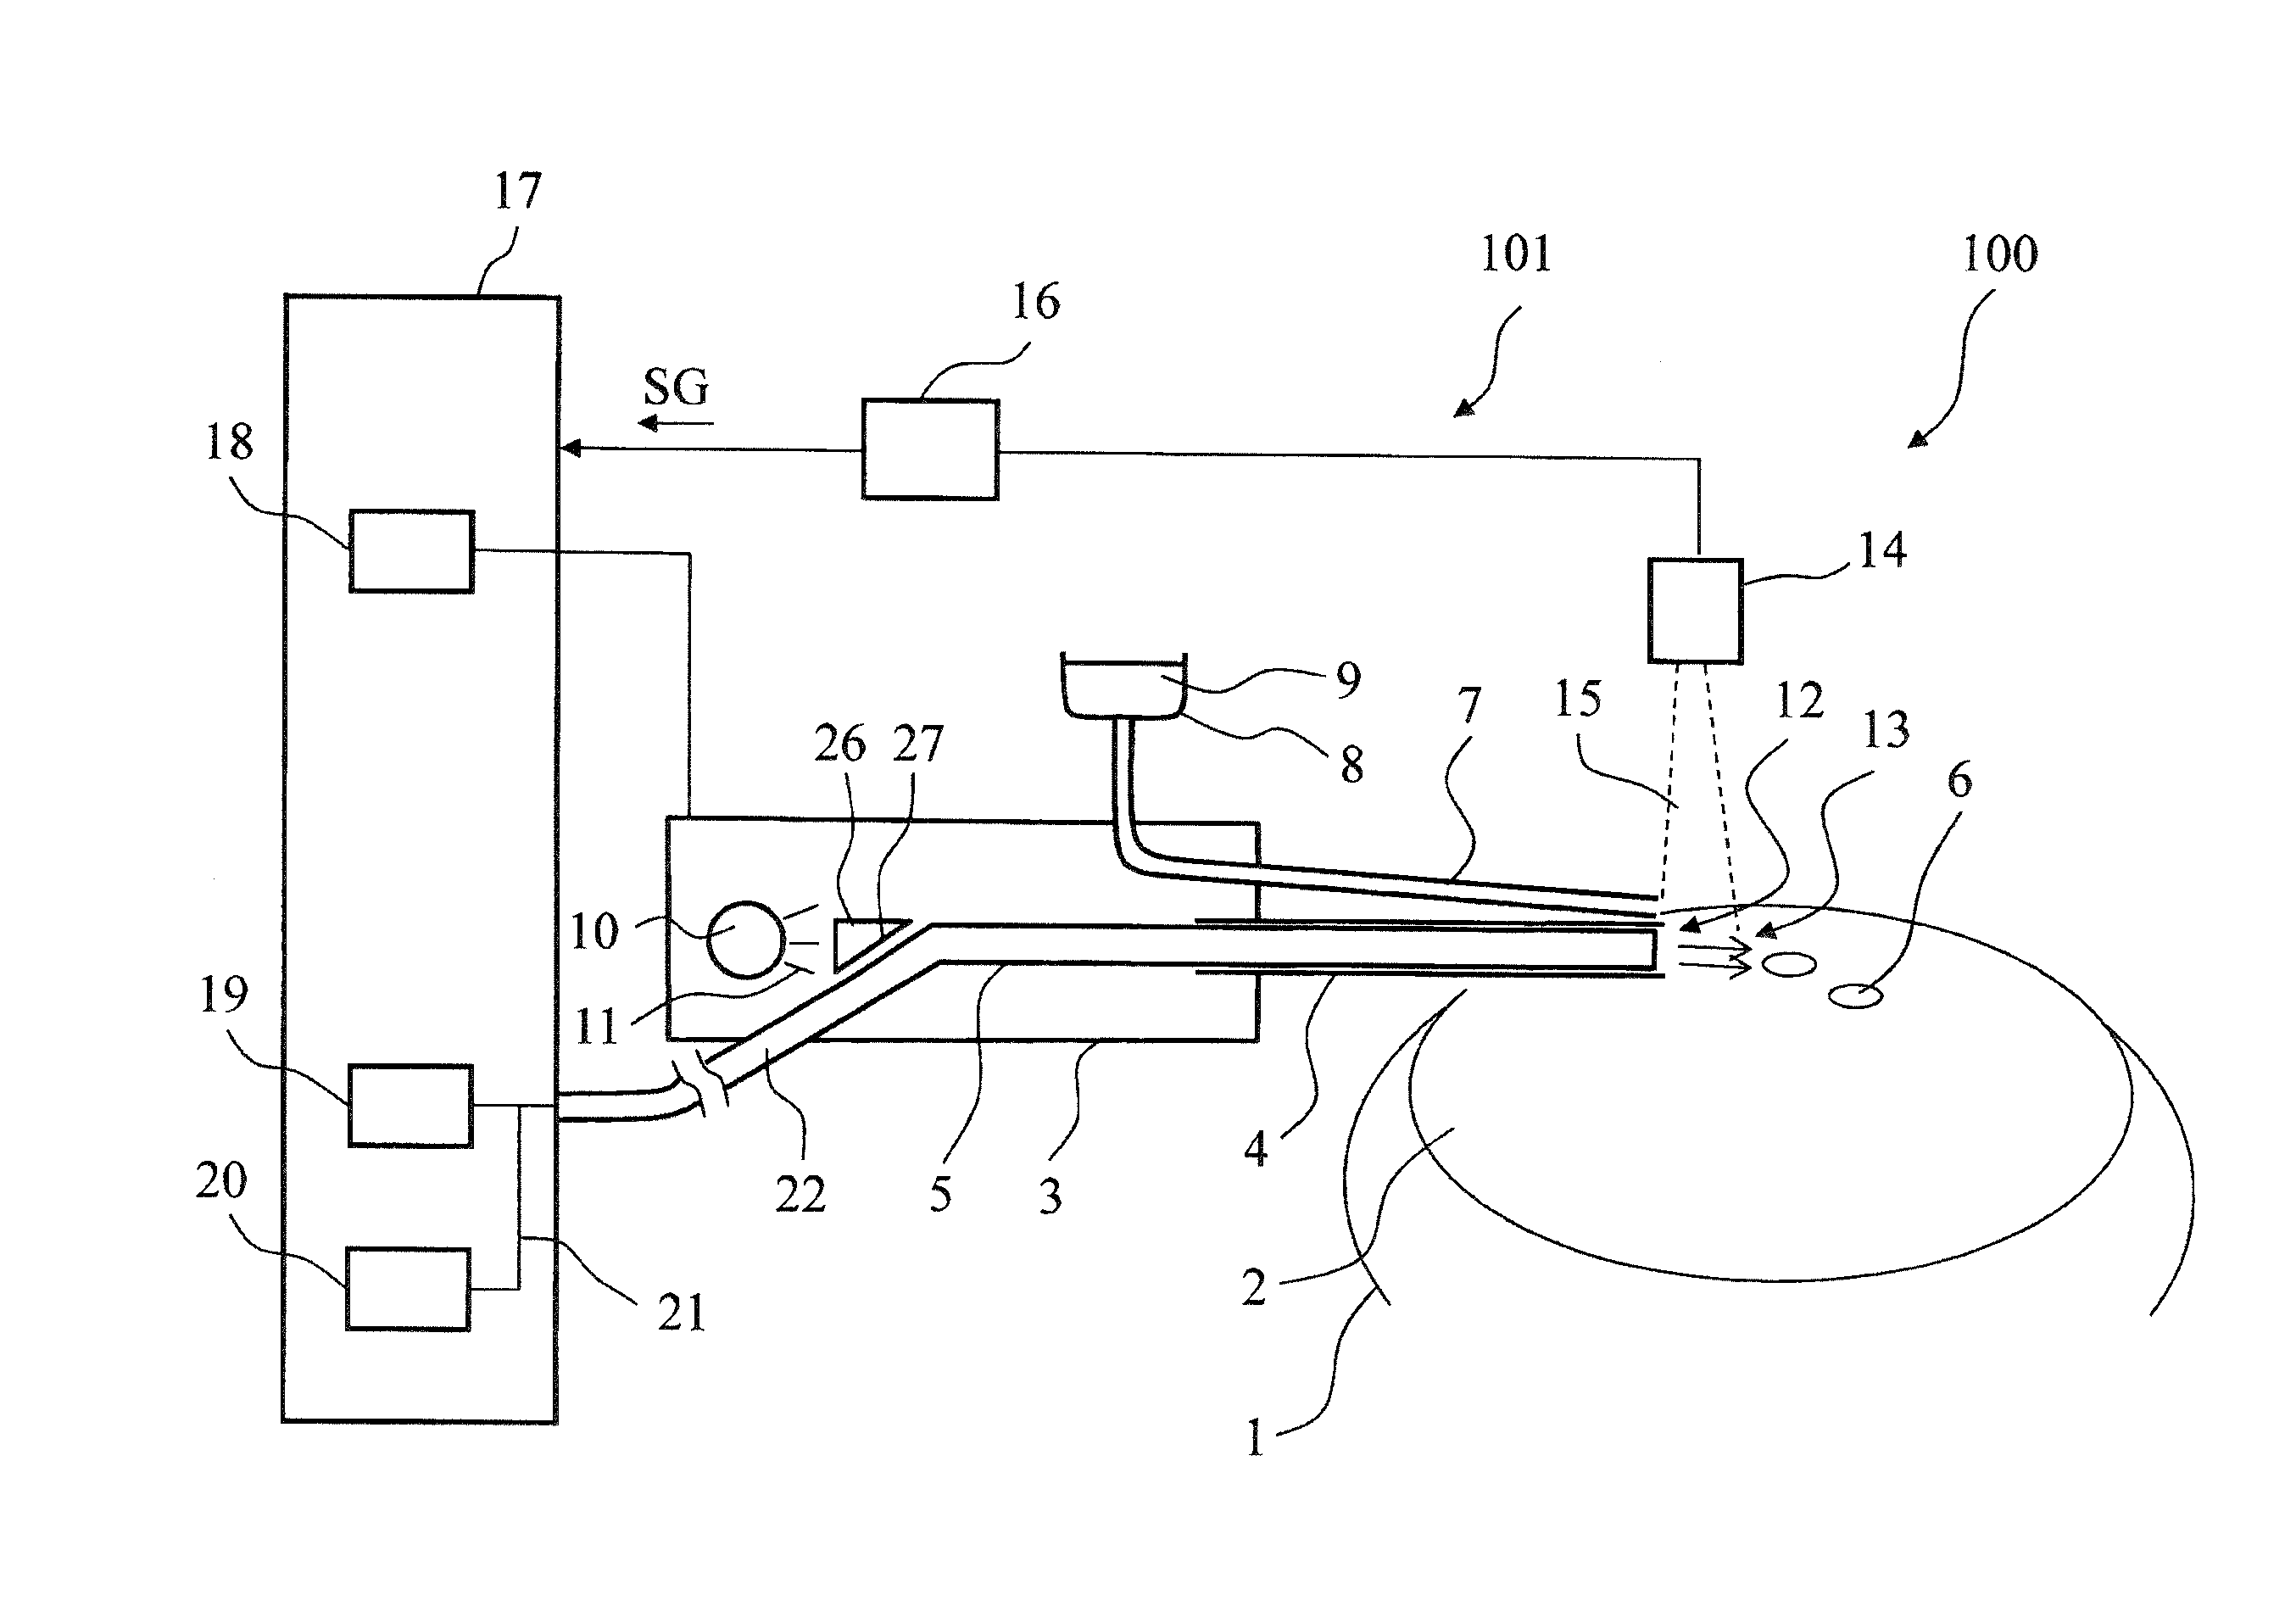 Control arrangement for an ophthalmic surgical system